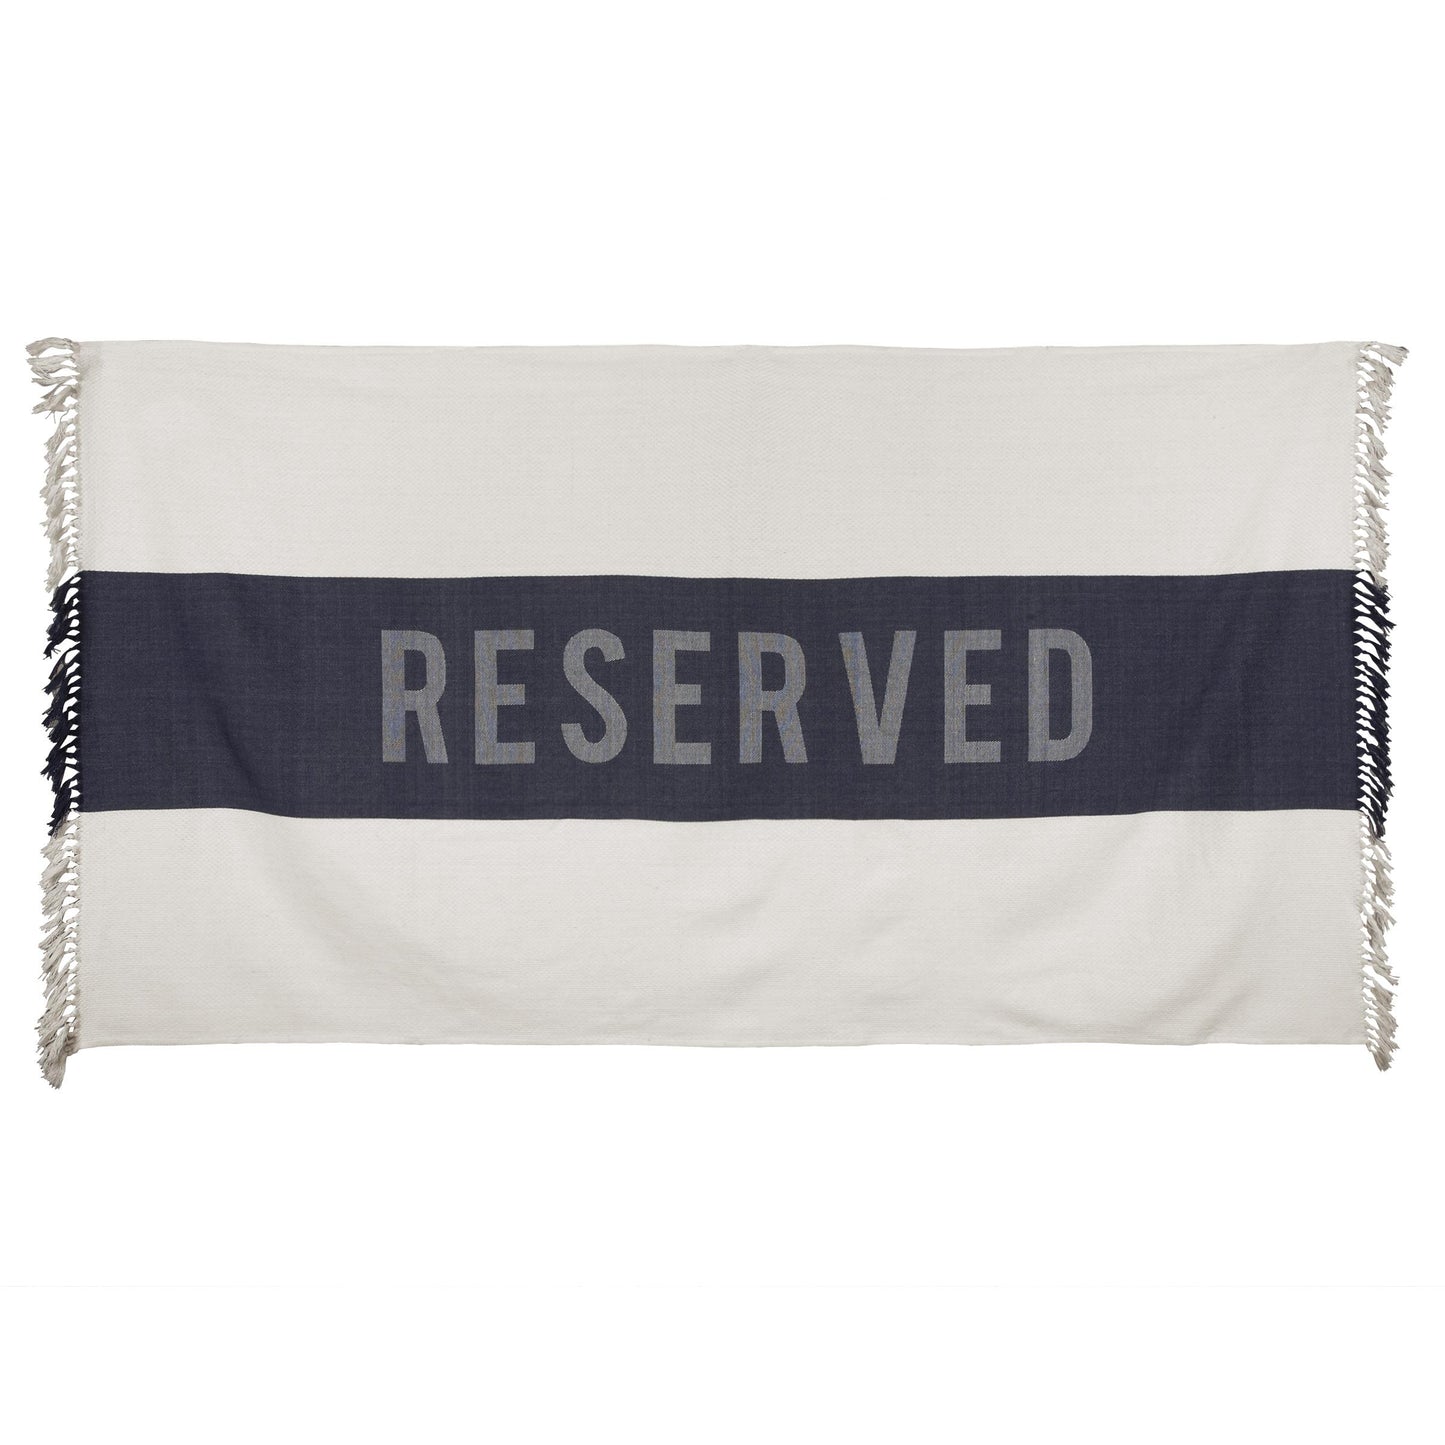 "Reserved" Beach Towel